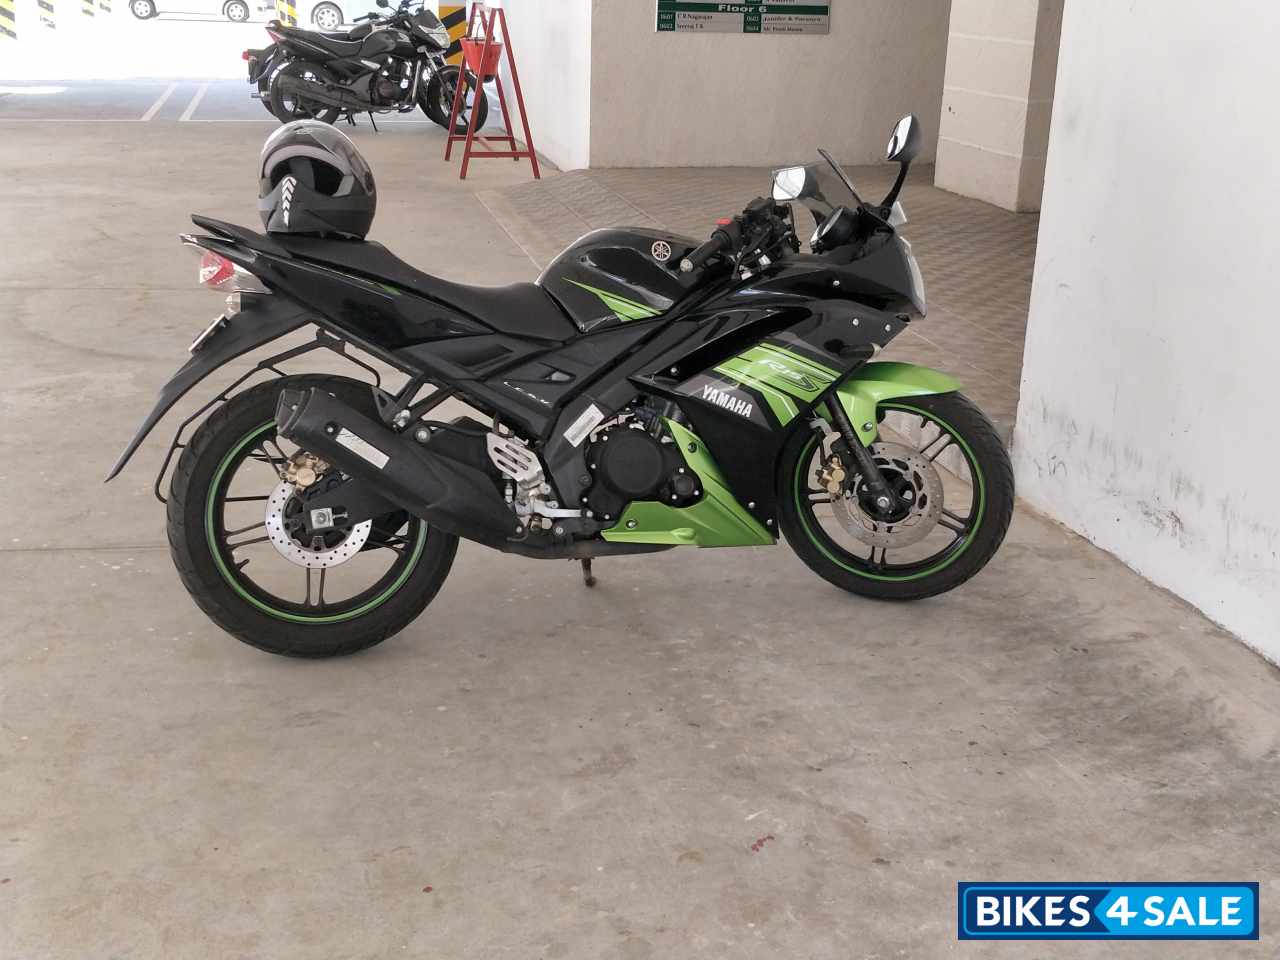 Used 2016 model Yamaha YZF R15 S for sale in Chennai. ID 313735 ...